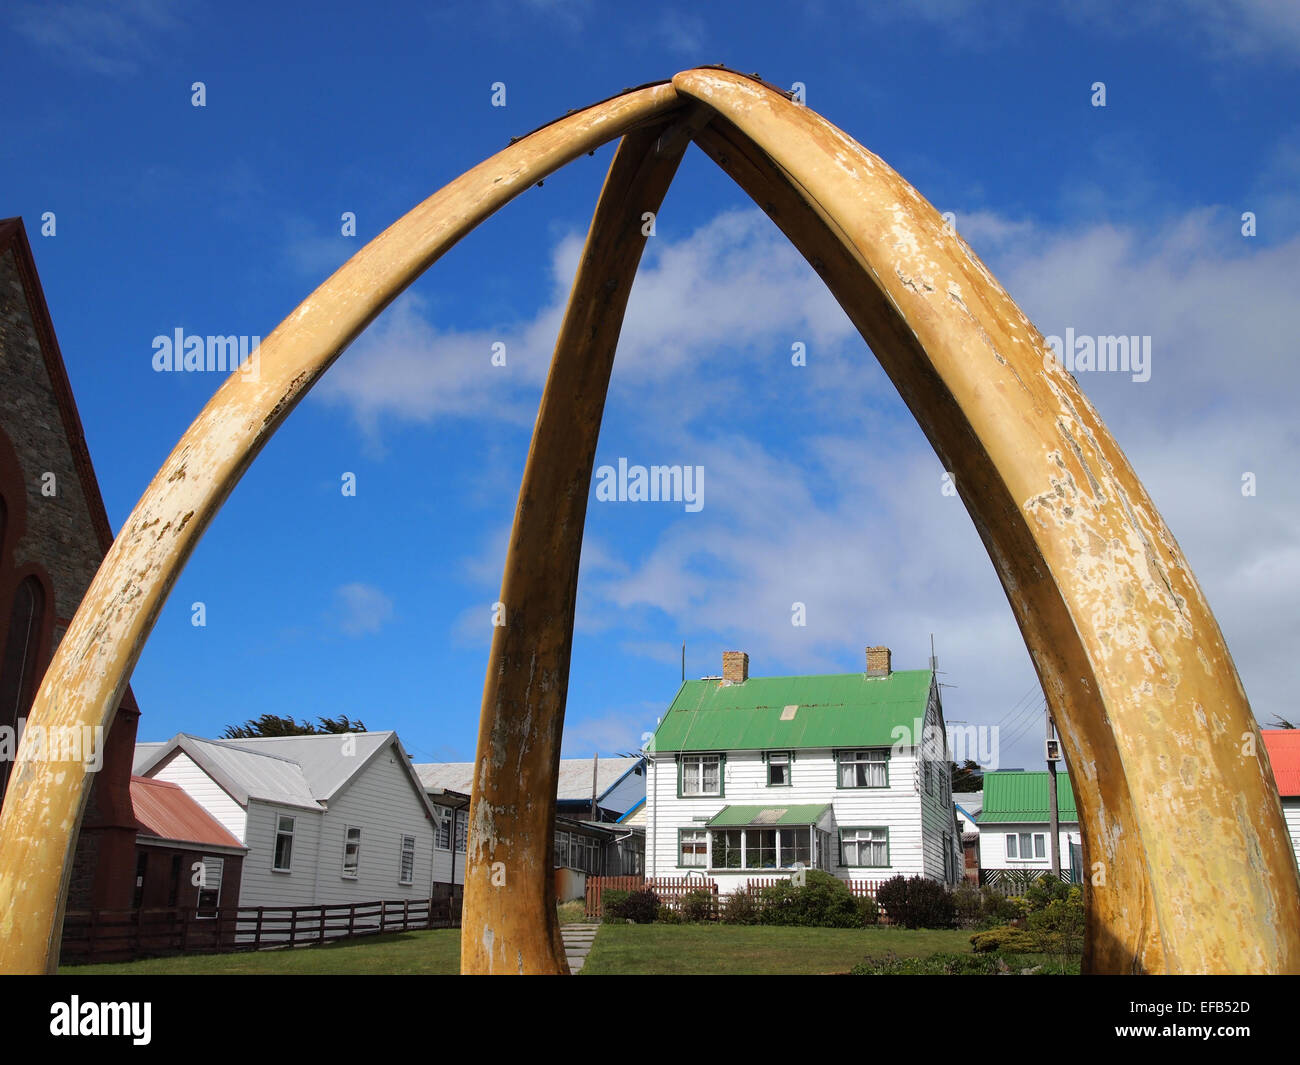 The famous whalebone arch at the Falkland Island capital of Stanley Stock Photo